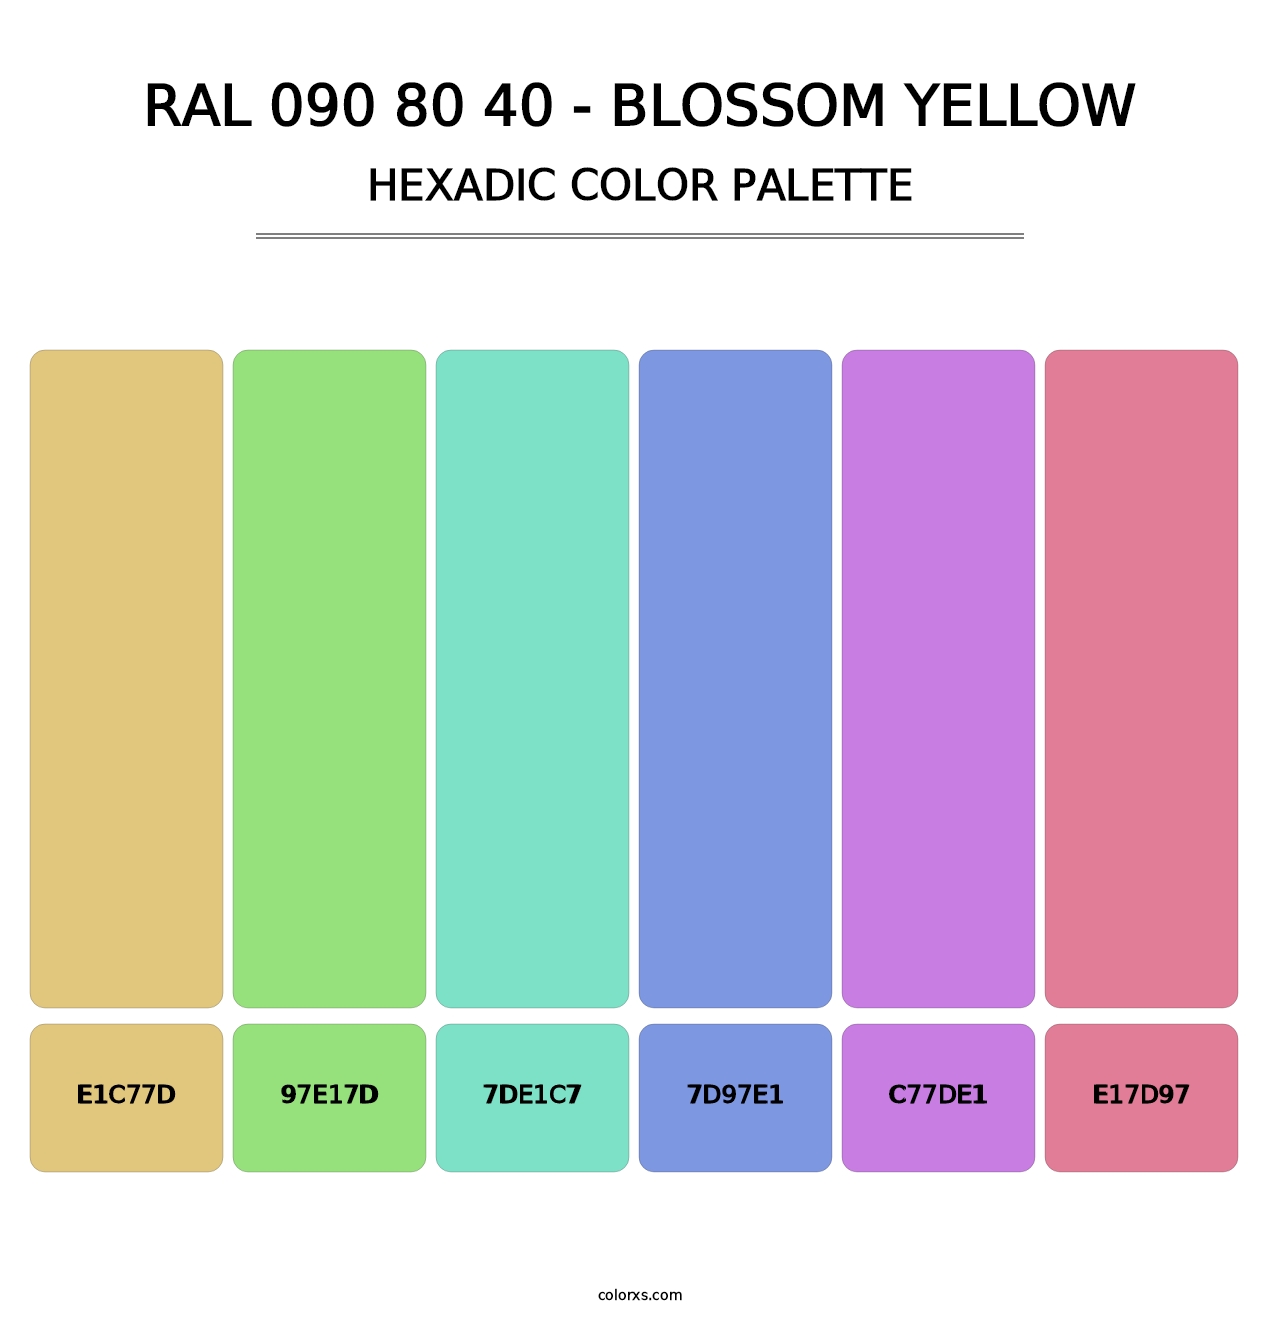 RAL 090 80 40 - Blossom Yellow - Hexadic Color Palette